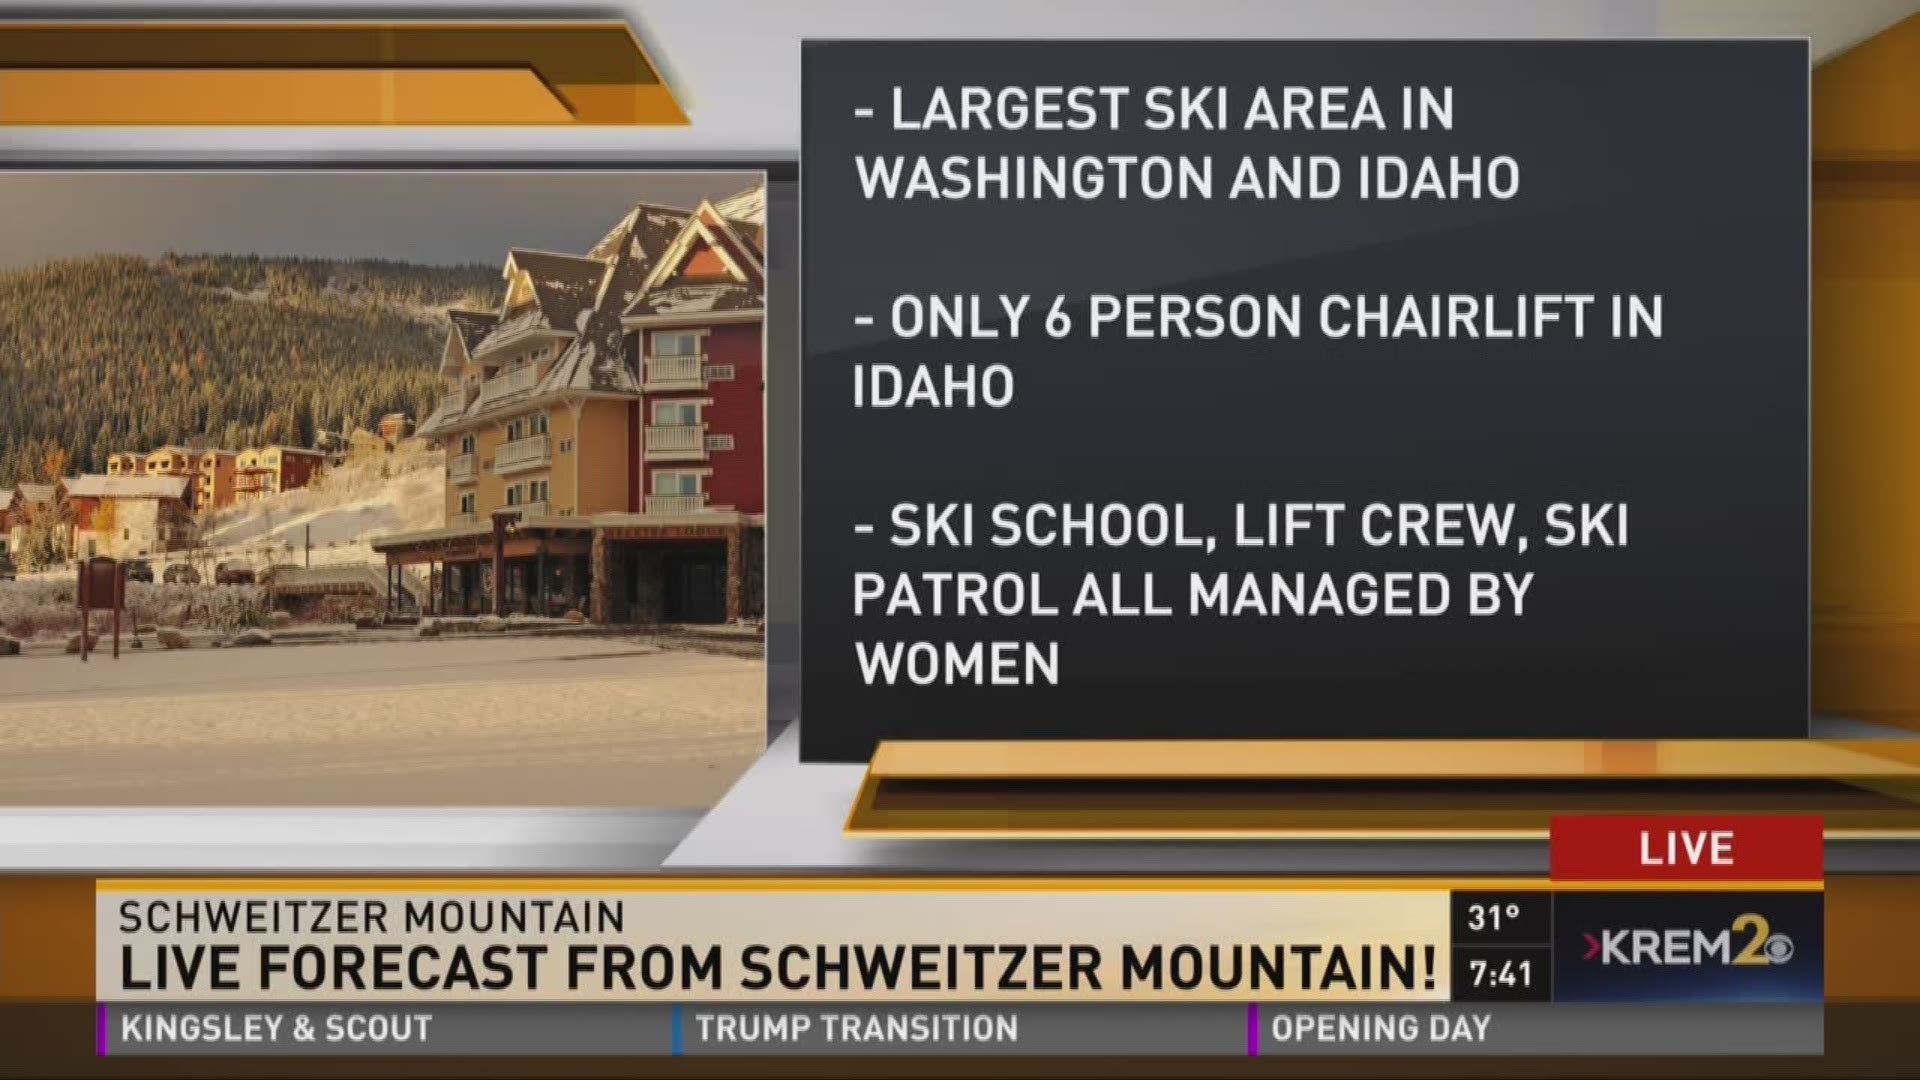 Five facts you may not know about Schweitzer Mountain